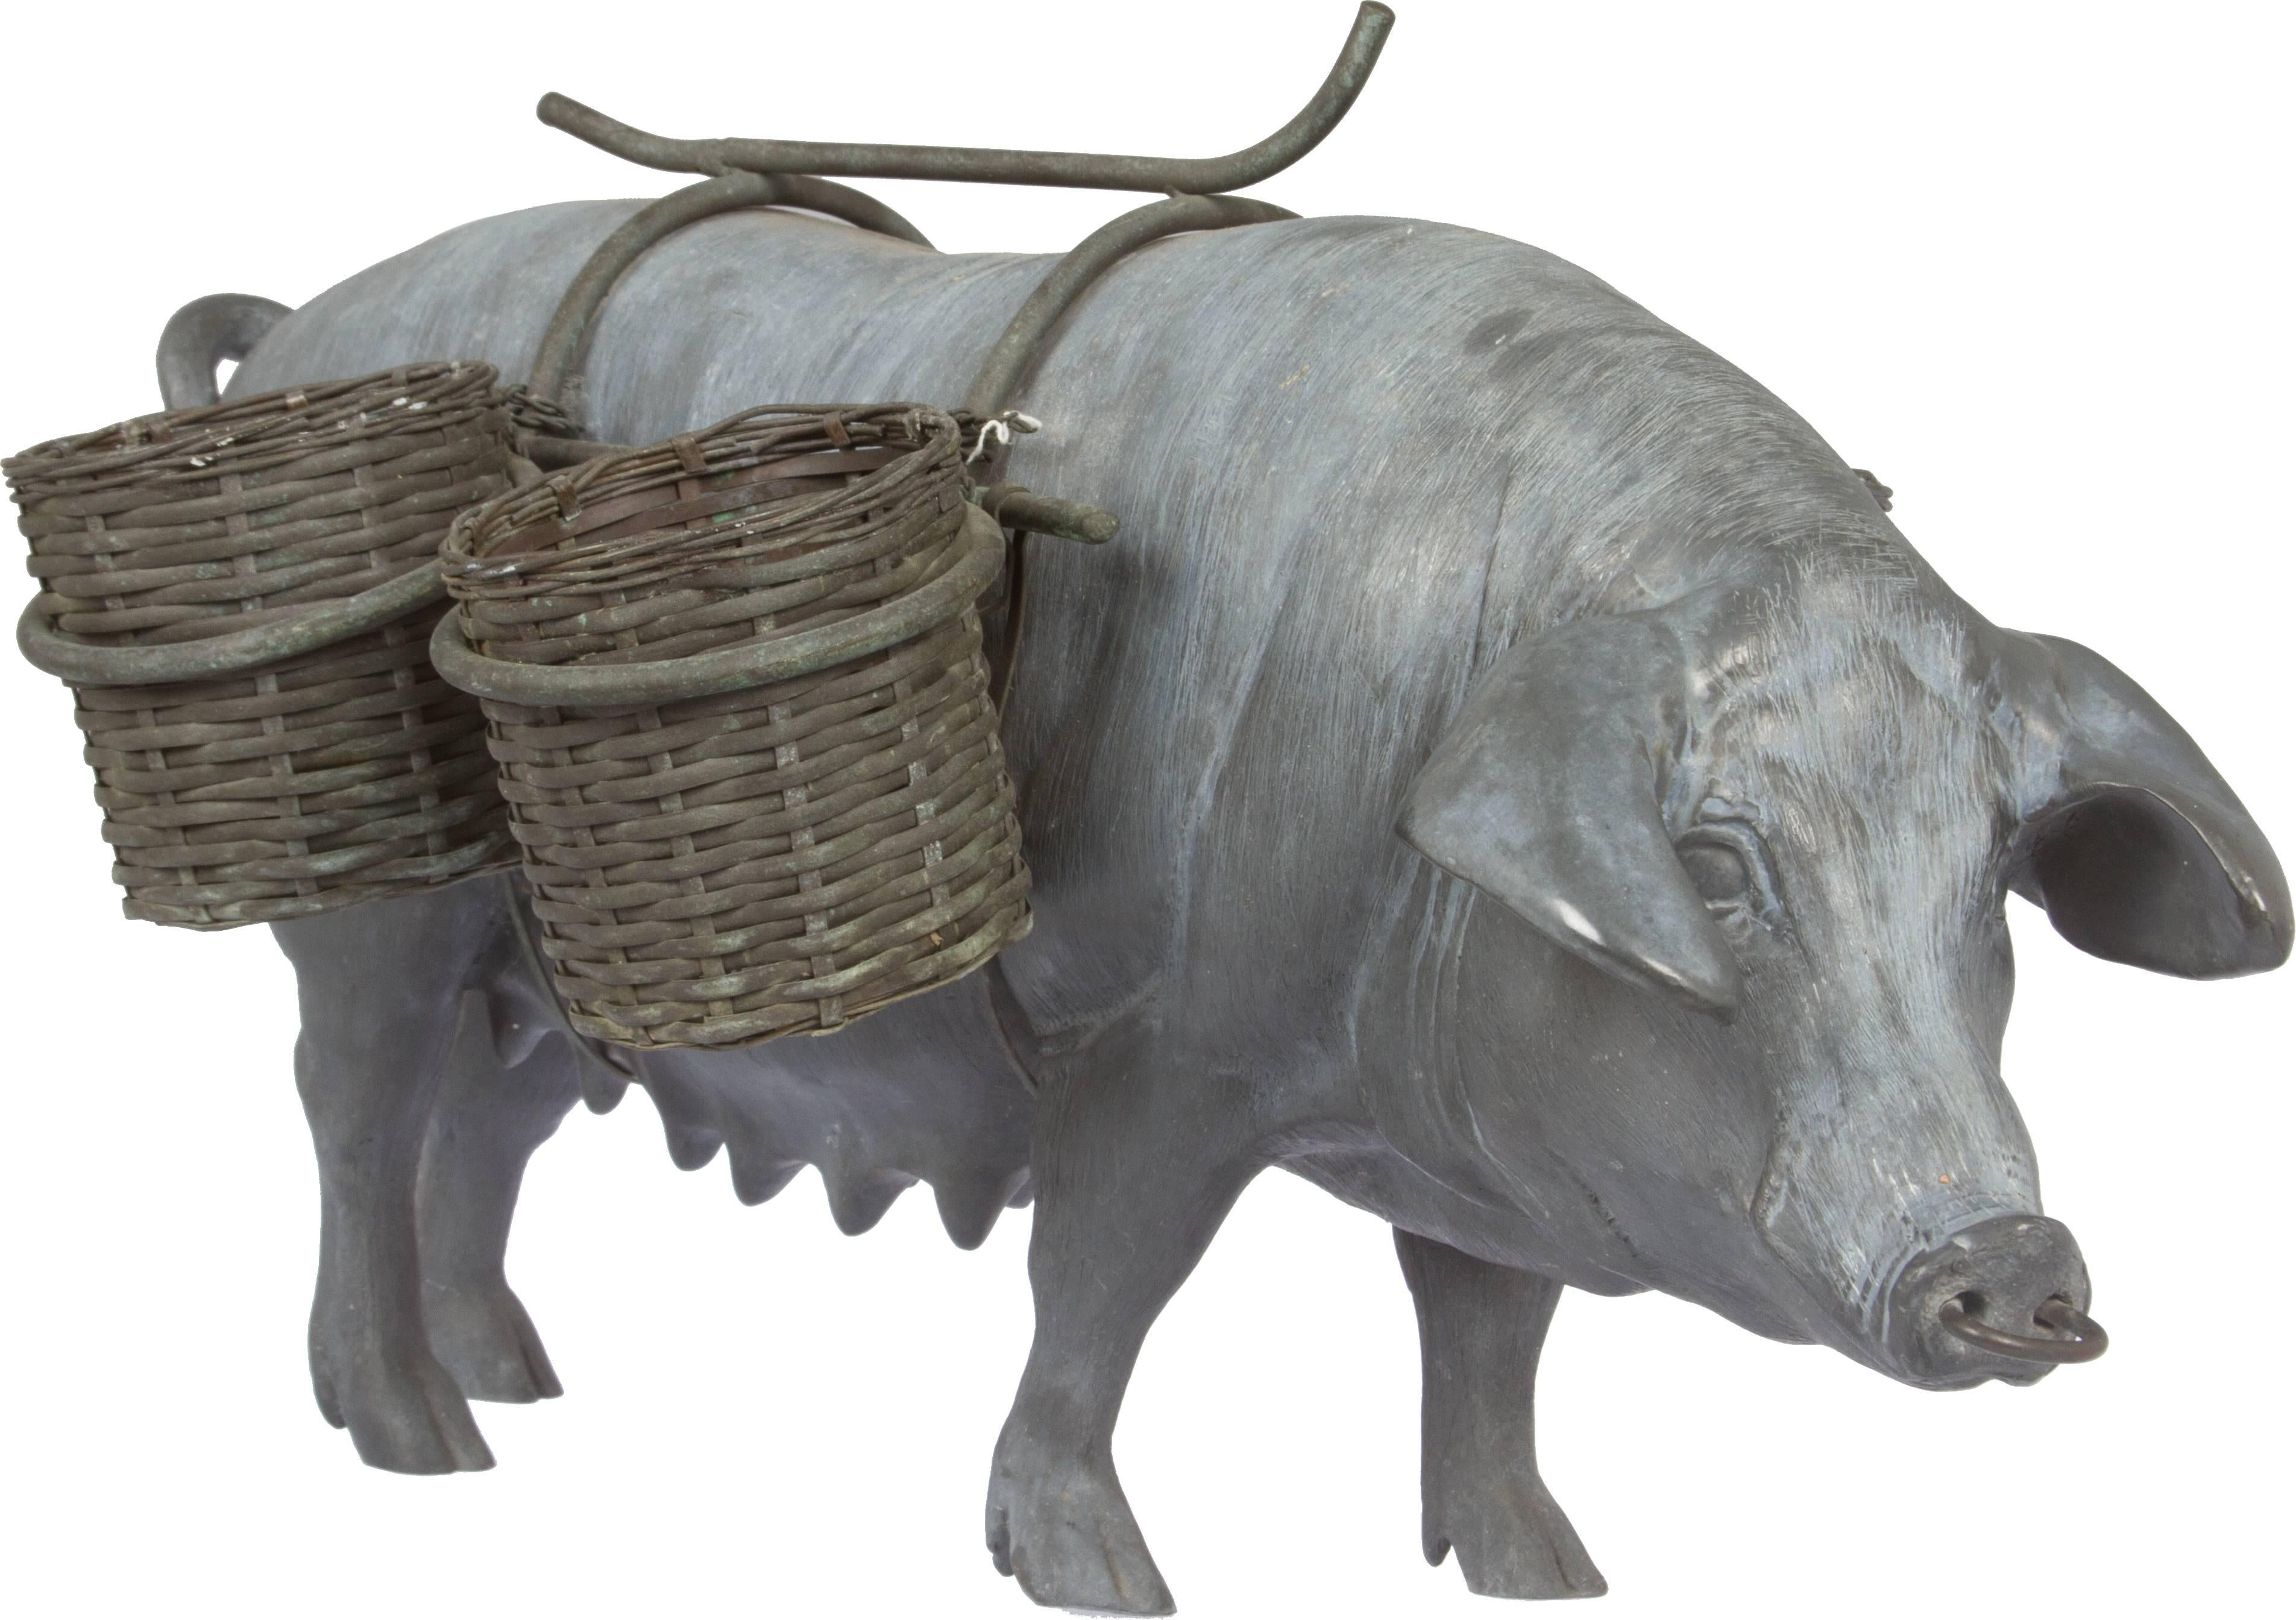 Four woven Brass baskets are carried by this sow. She is heavy and very well cast and life like.